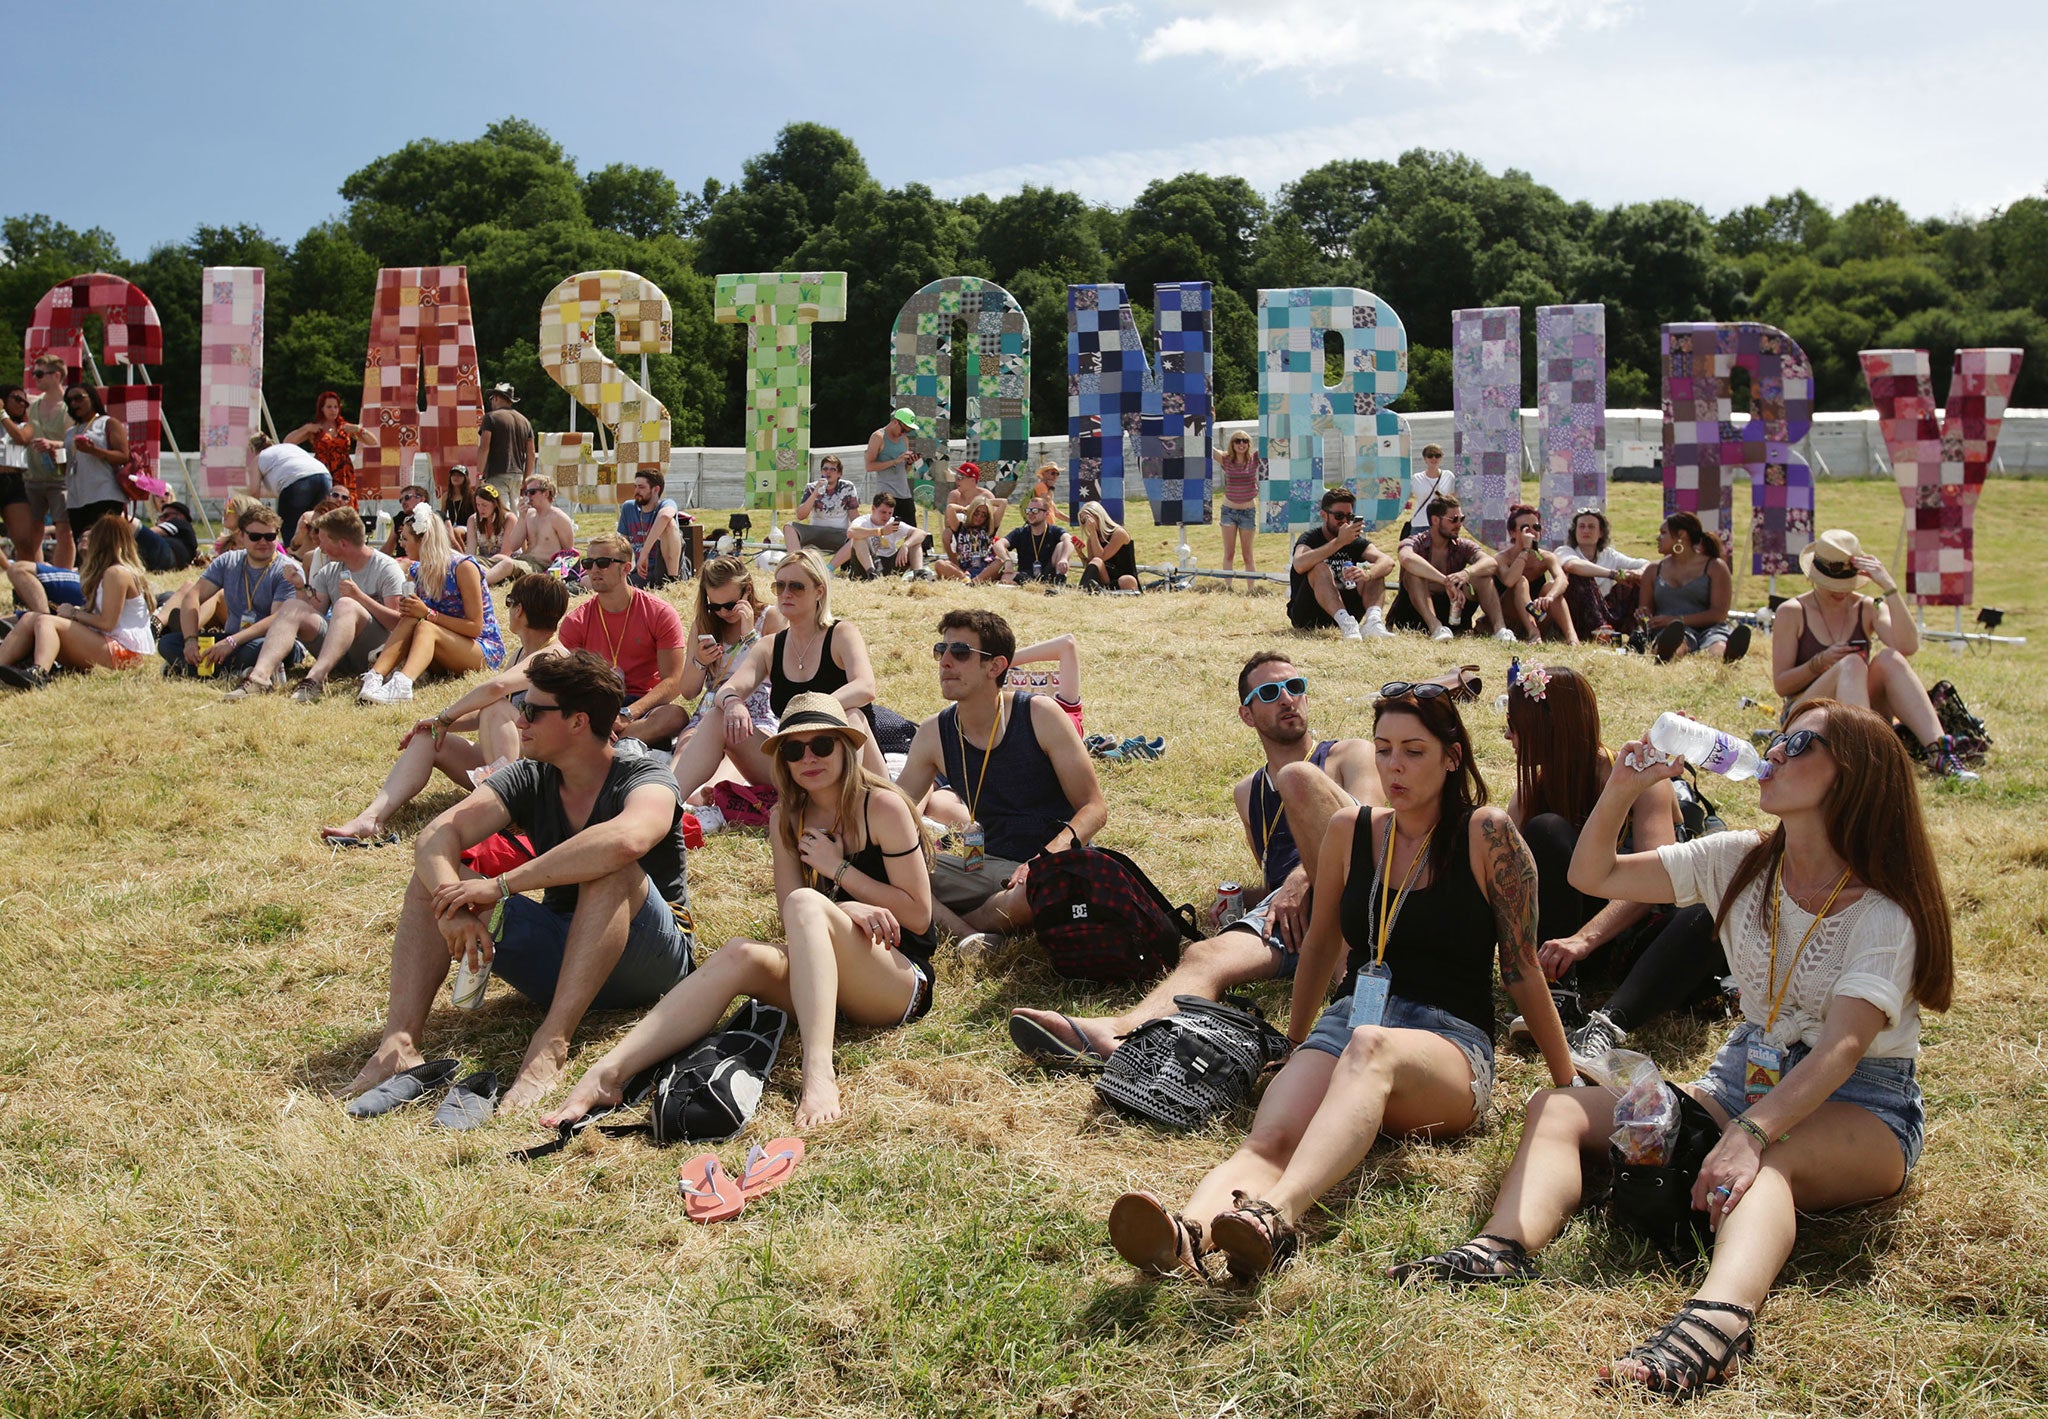 Follow our tips for bagging tickets and you could be in the Glastonbury crowd next summer